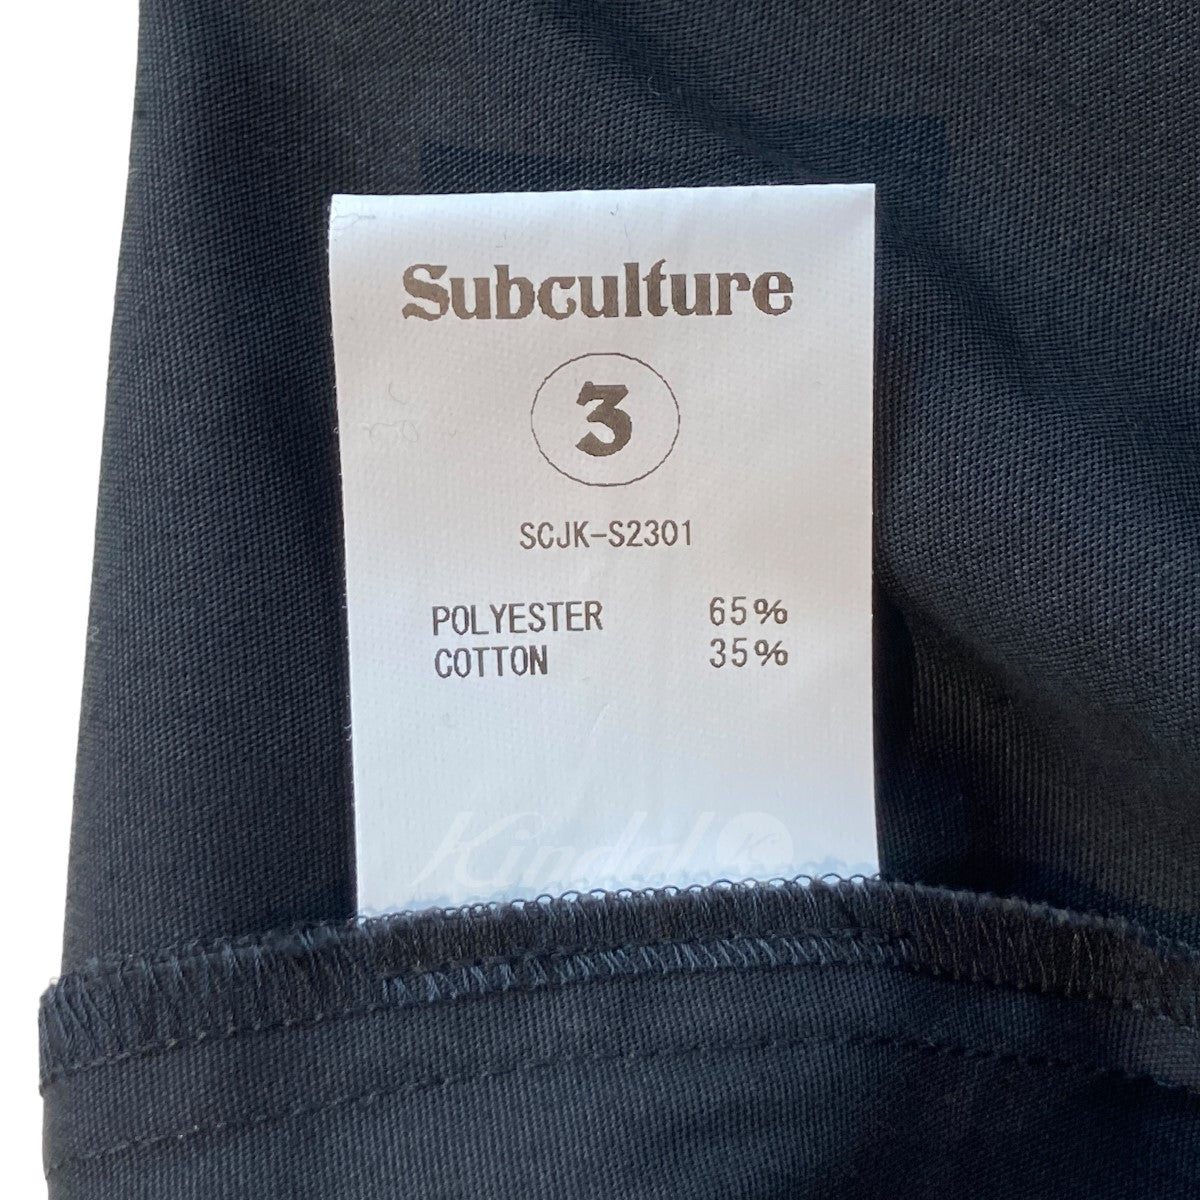 Subculture(サブカルチャー) 23SS SWING TOP JACKET